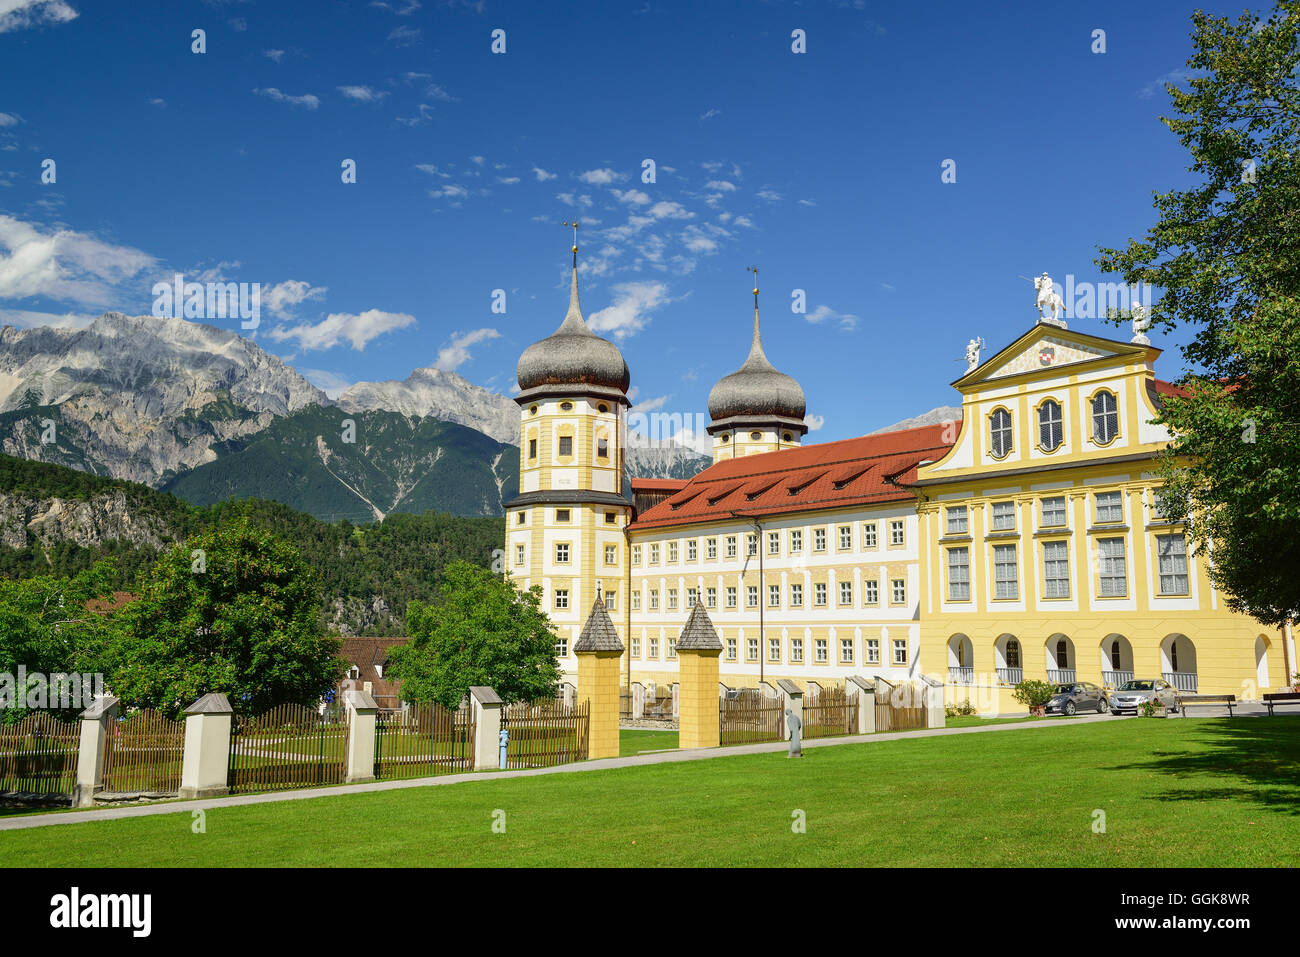 Monastery Stams, Mieming Range in background, Stams, Tyrol, Austria Stock Photo